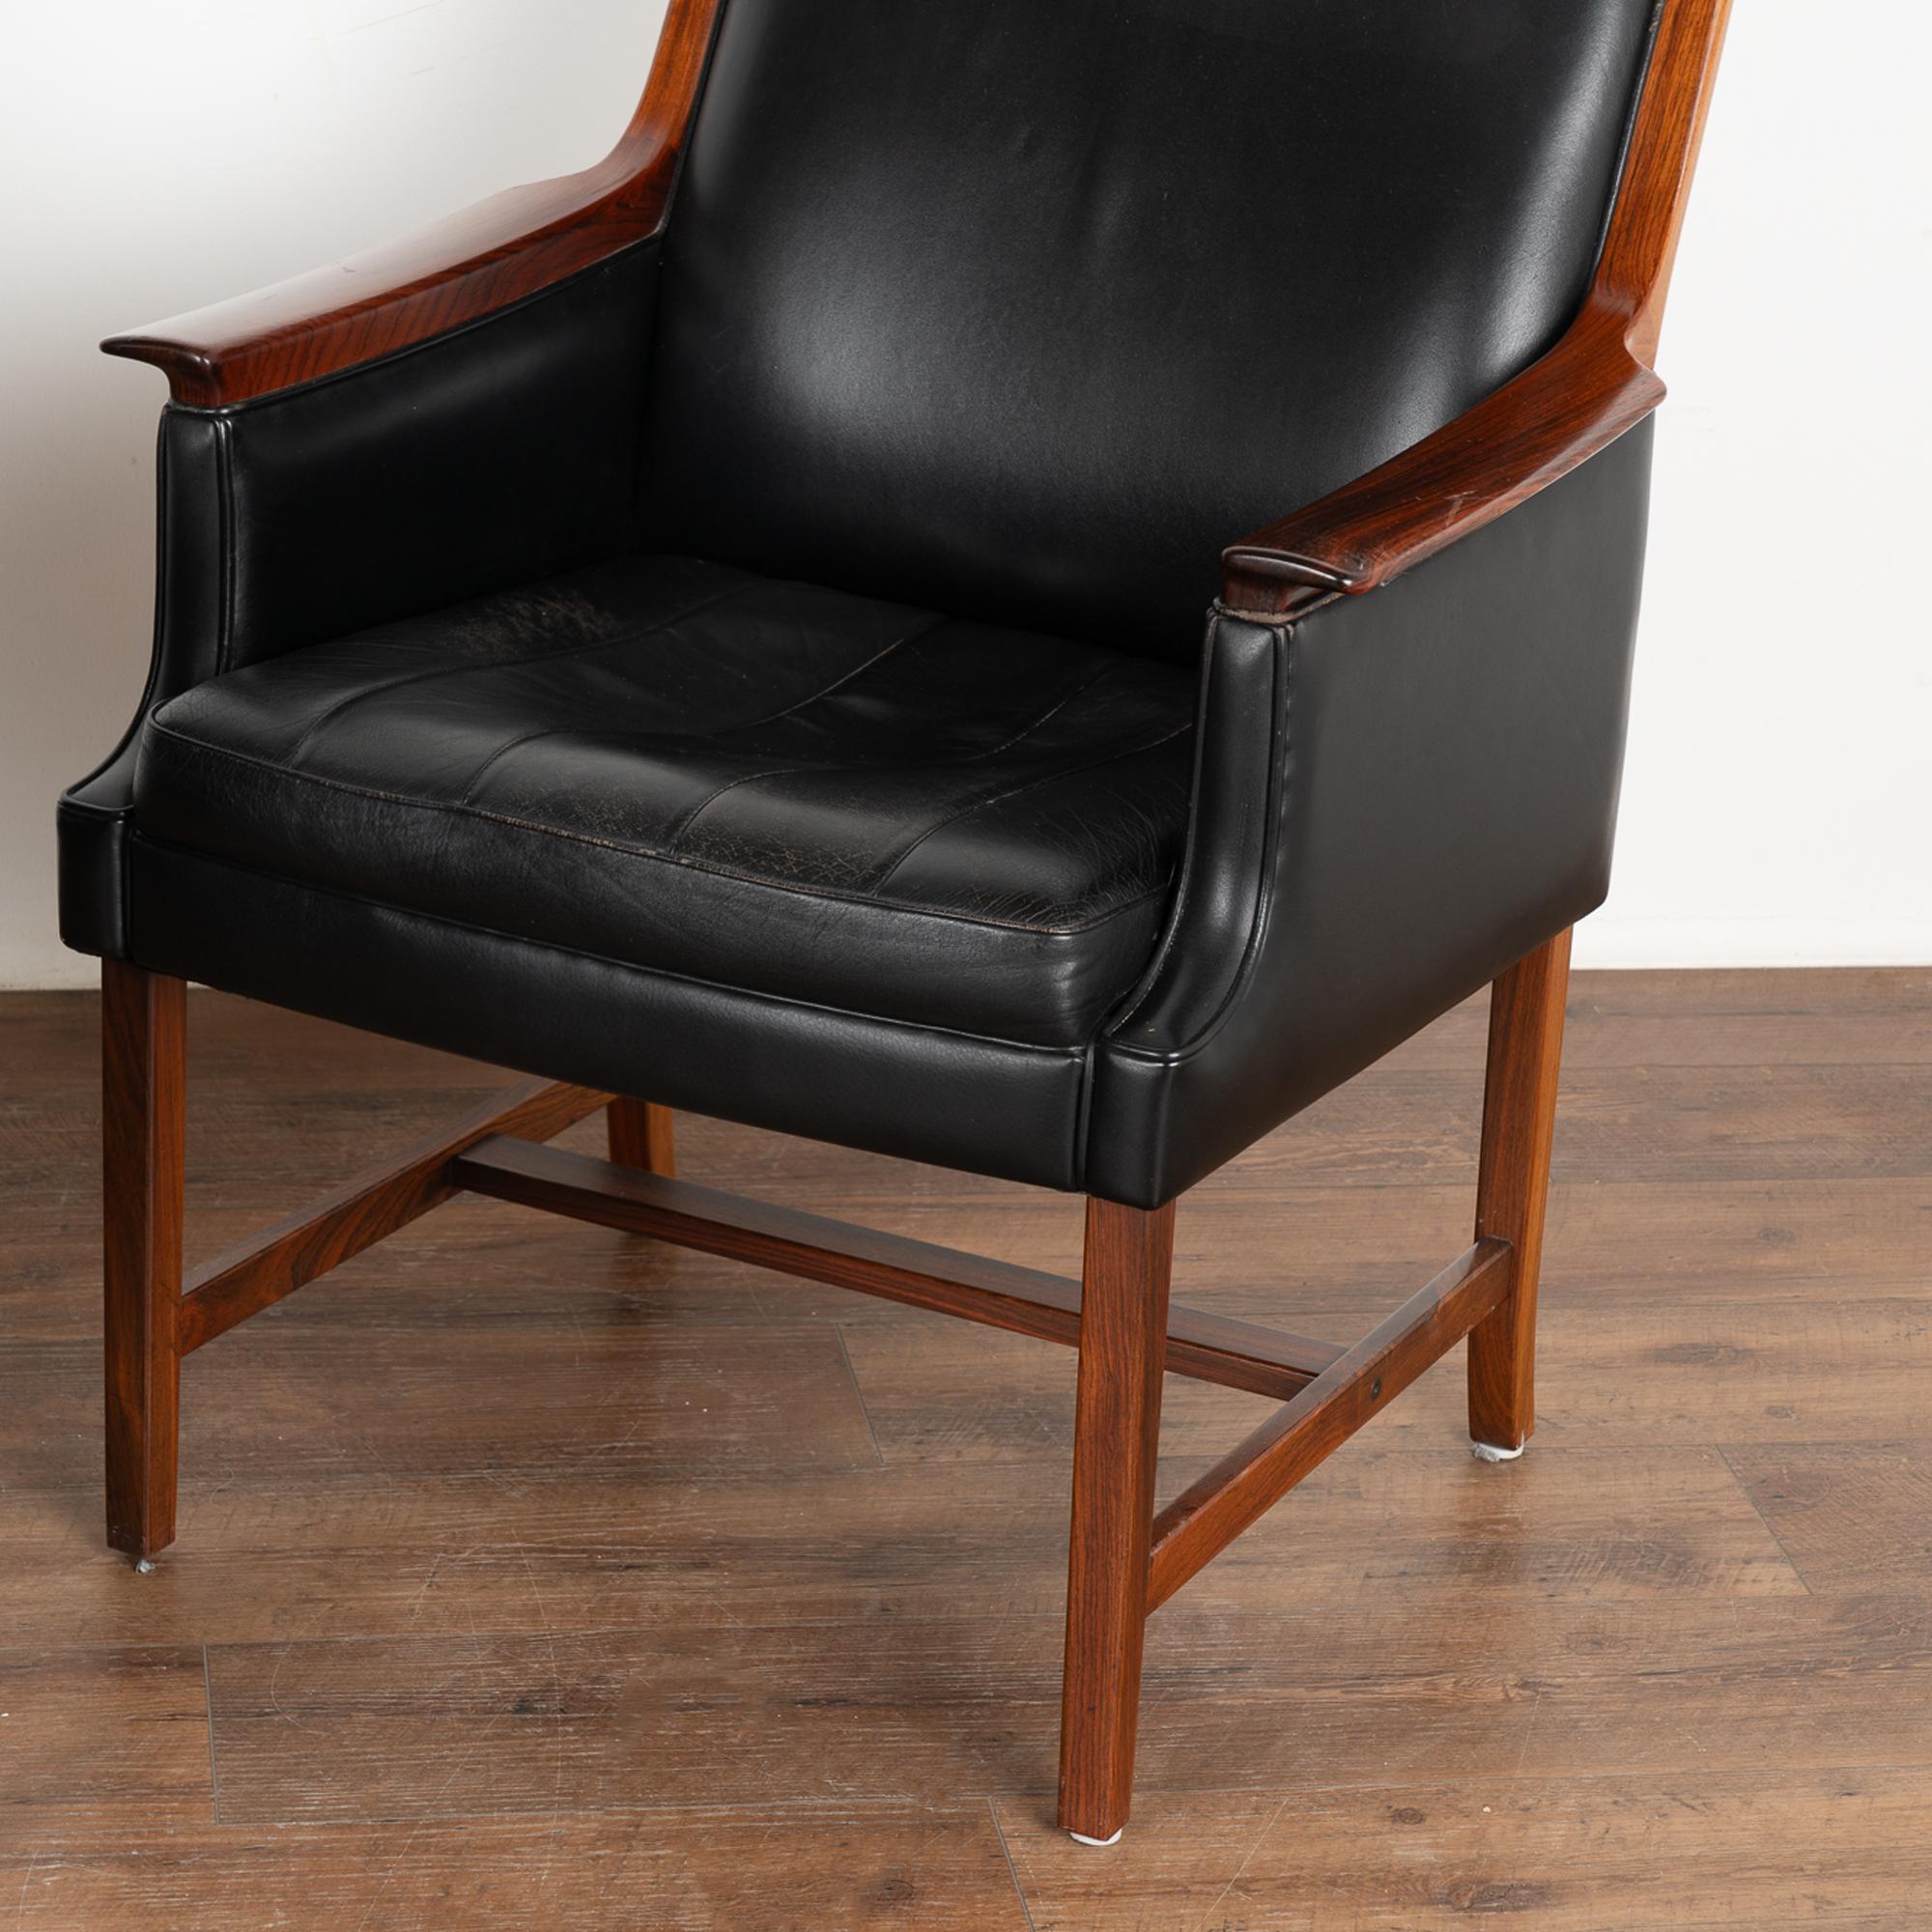 Set of 6 Mid Century Black Leather Chairs by Torbjørn Afdal, Norway circa 1970 In Good Condition For Sale In Round Top, TX